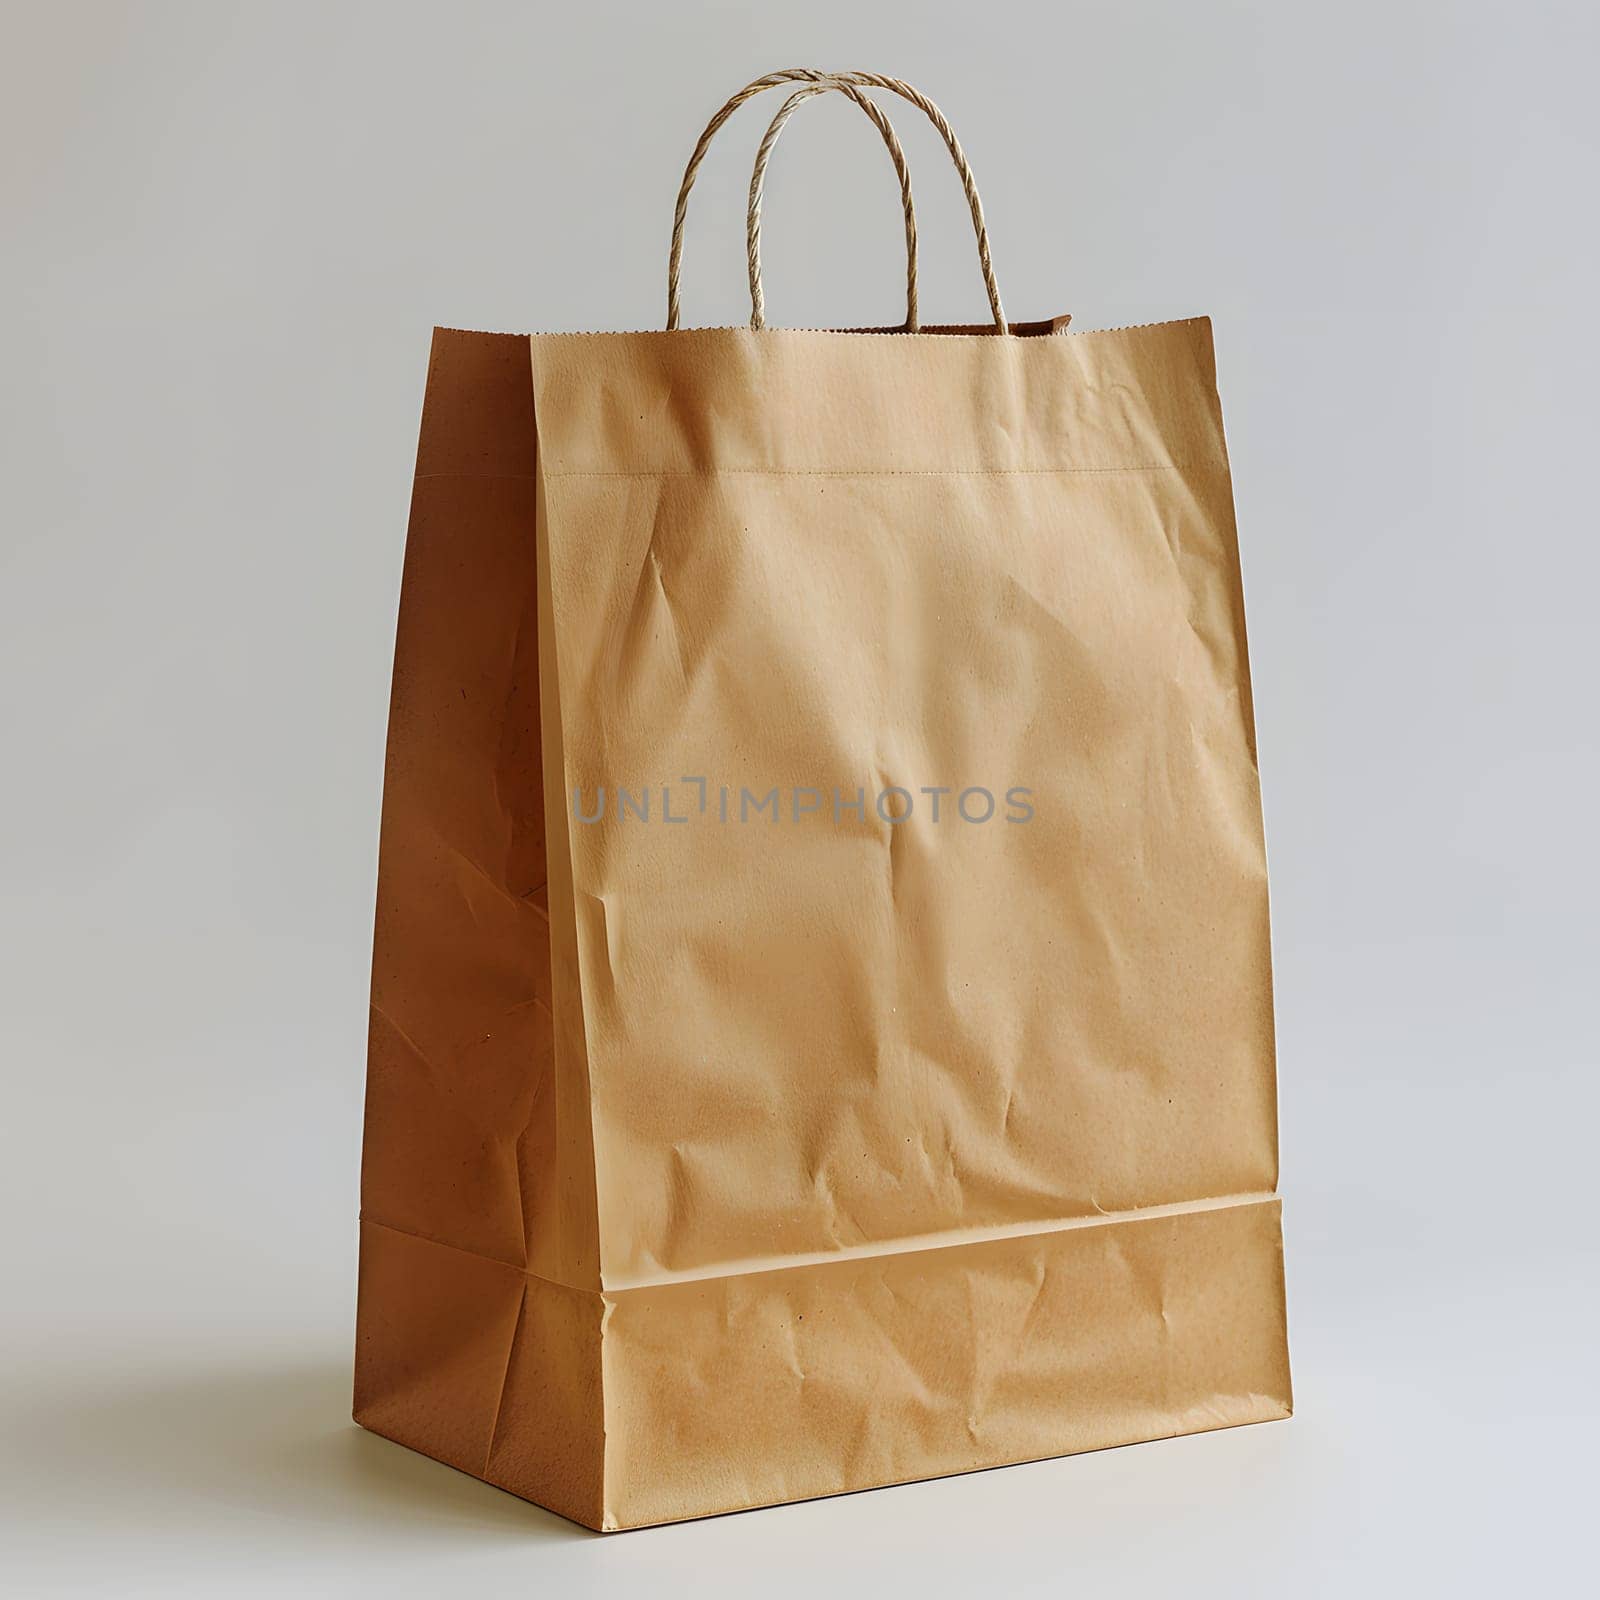 Brown paper bag resting on white surface stylish fashion accessory by Nadtochiy